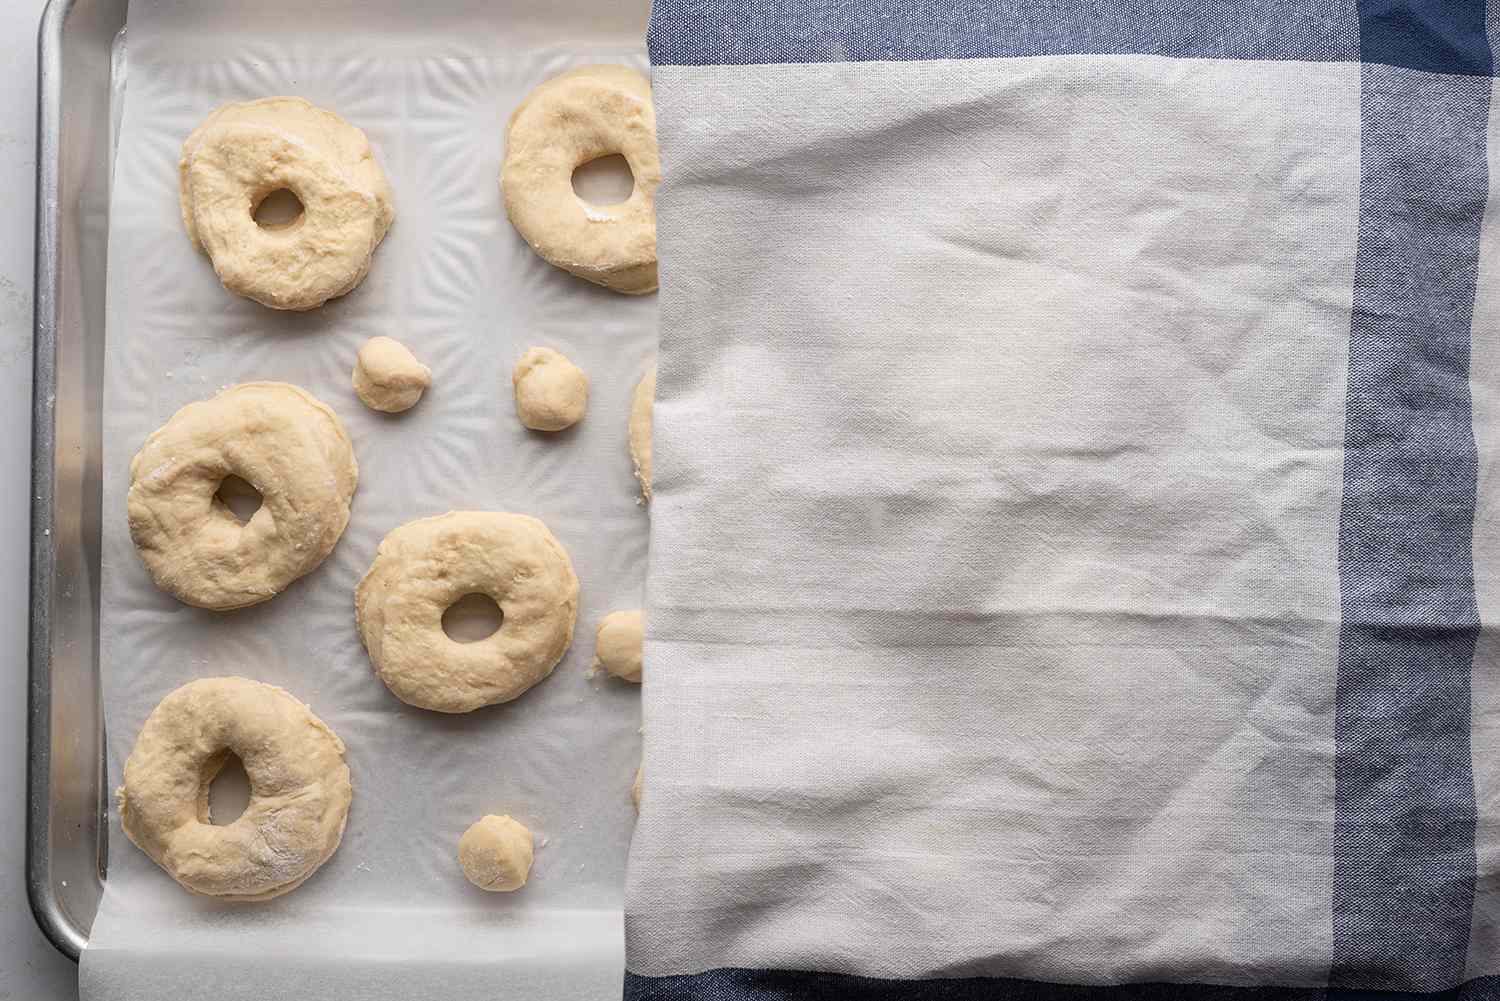 Doughnut dough on a baking sheet, covered with a towel 